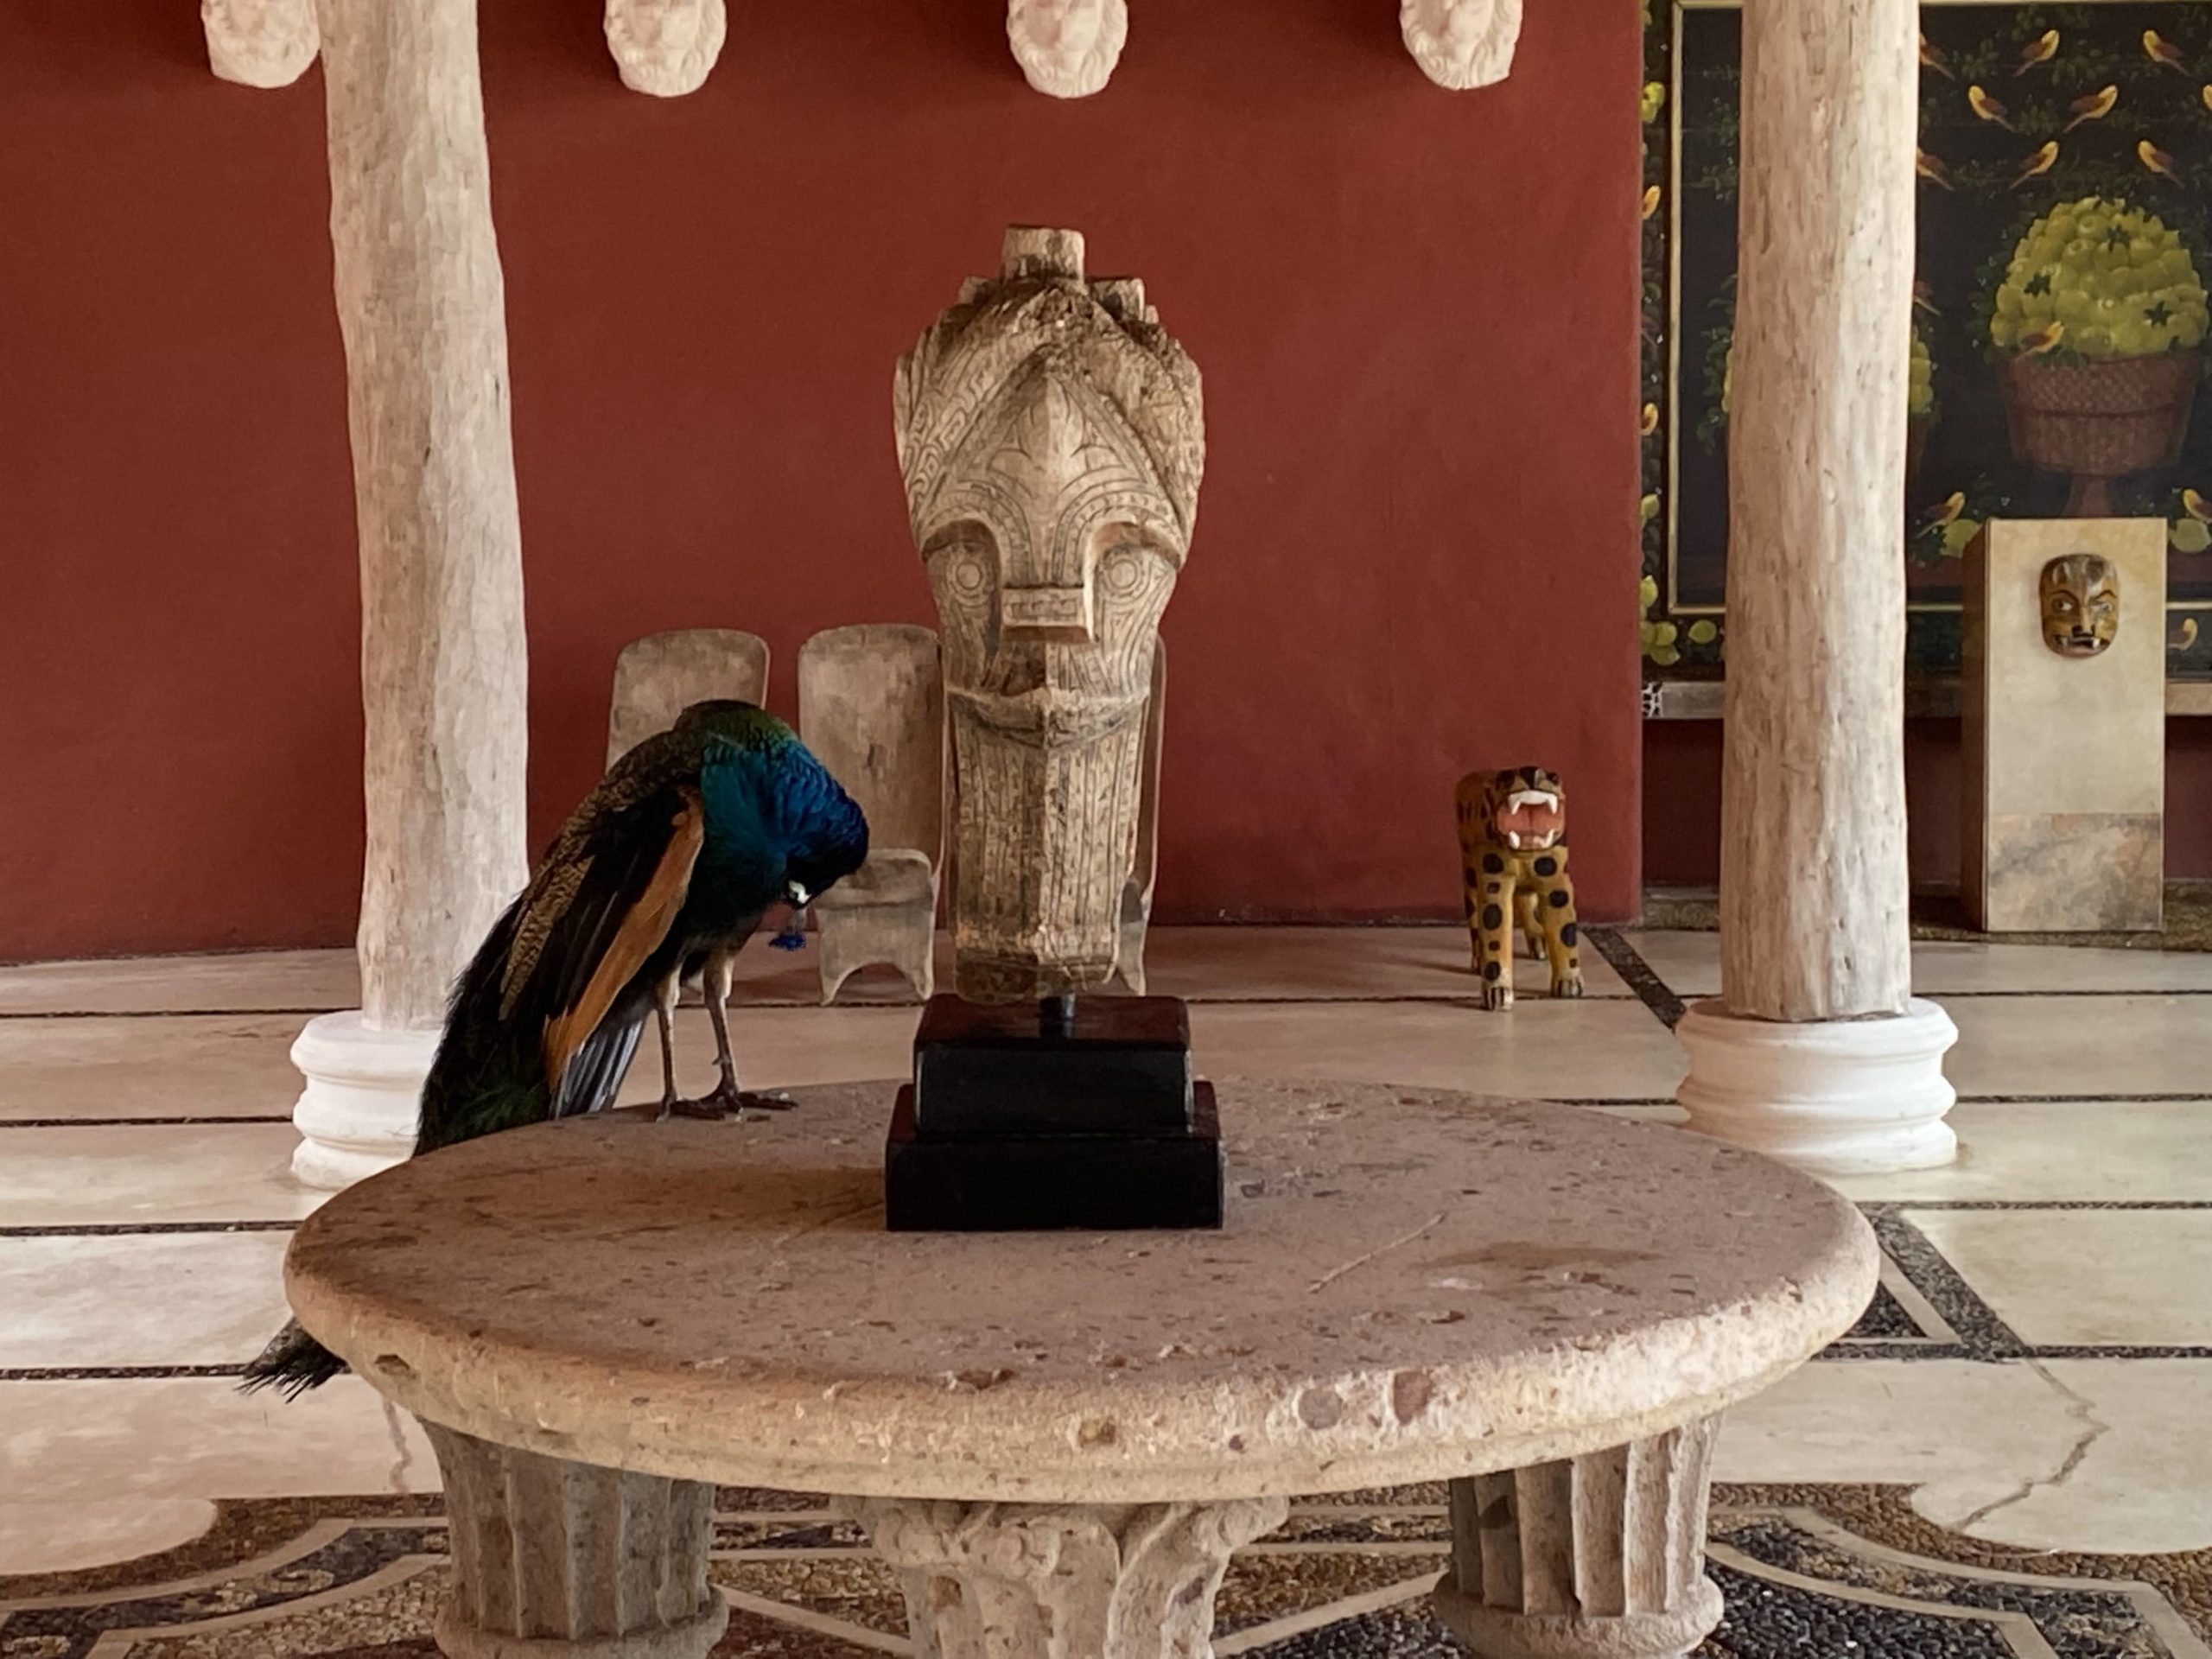 a peacock standing on a round table in a room with columns and a red wall